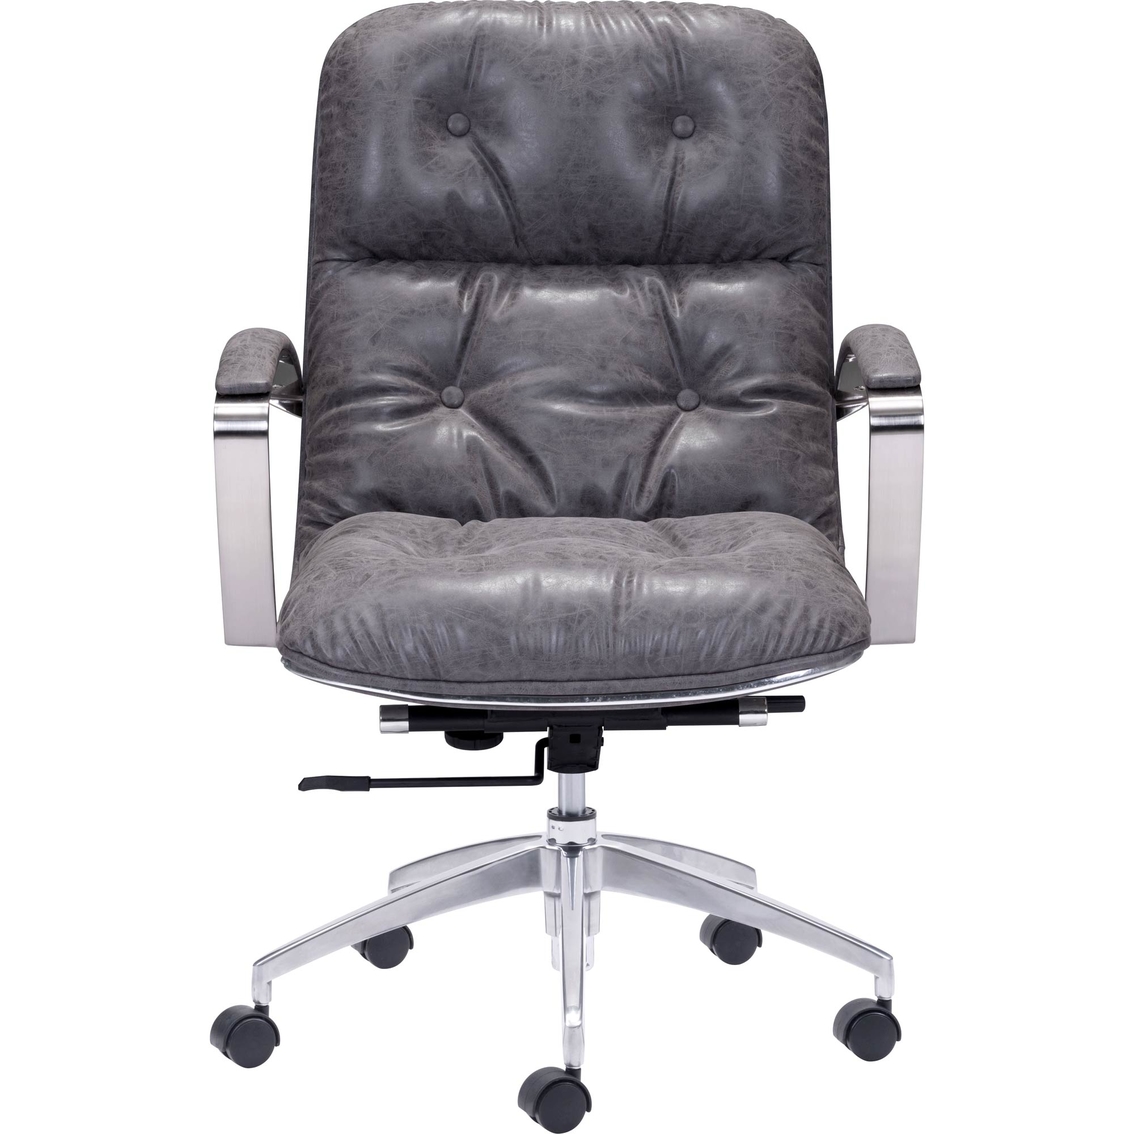 Zuo Modern Avenue Office Chair - Image 3 of 4